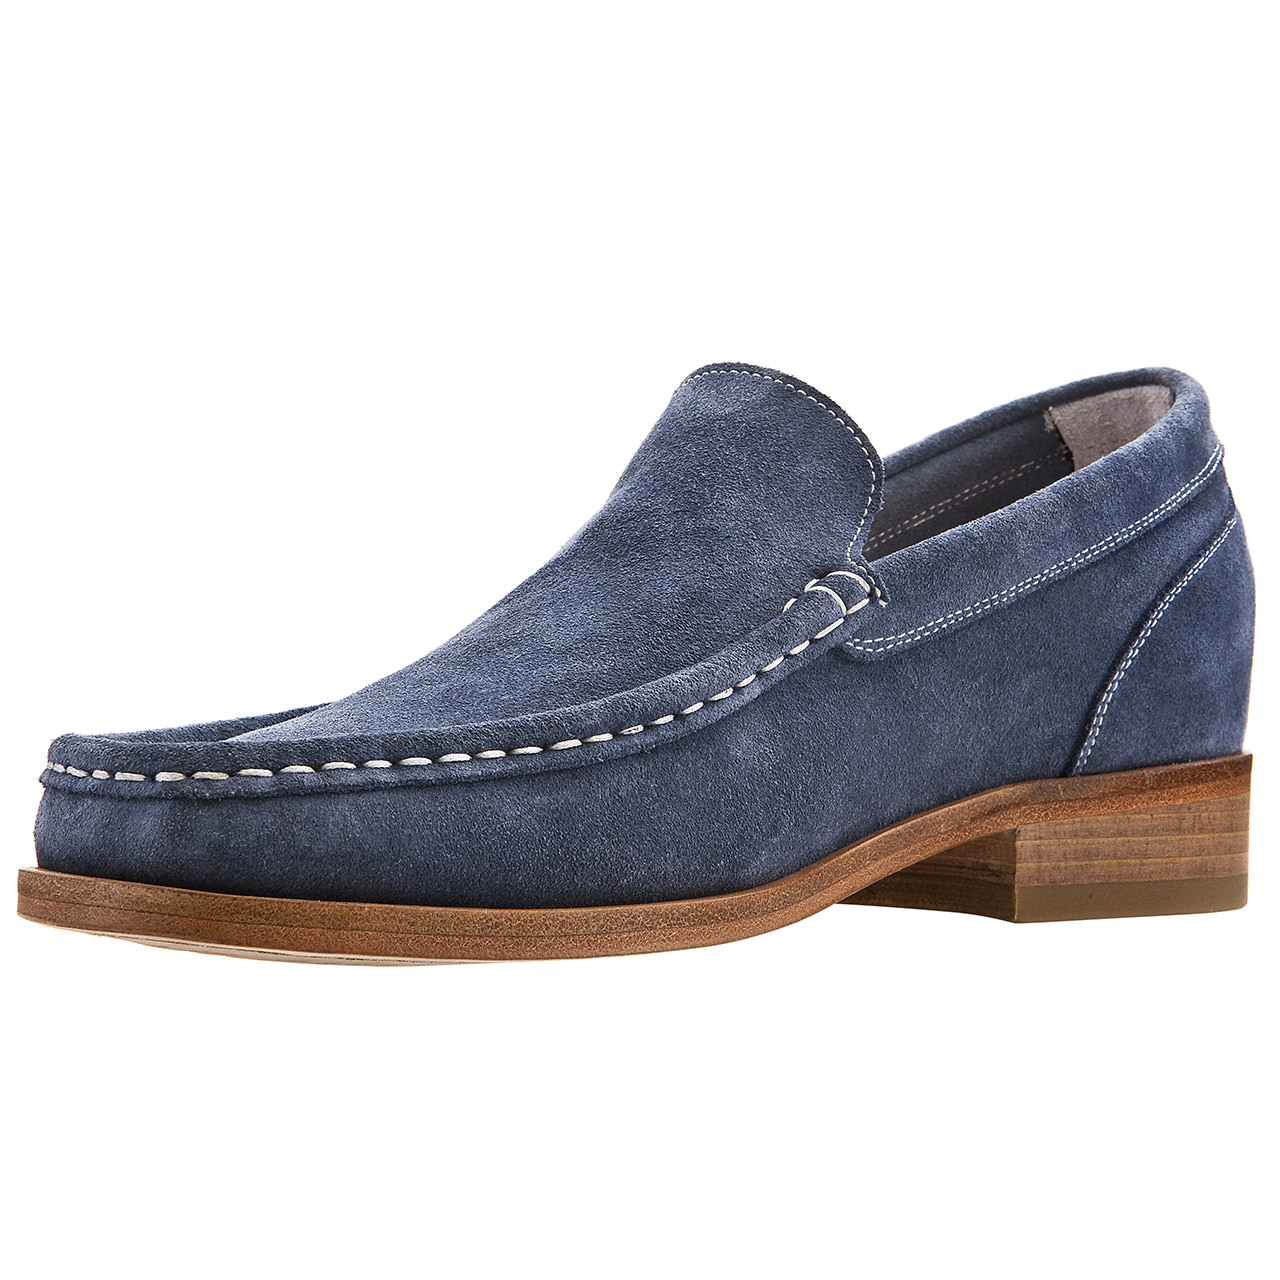 Height increasing shoes GuidoMaggi - Loafers Seville